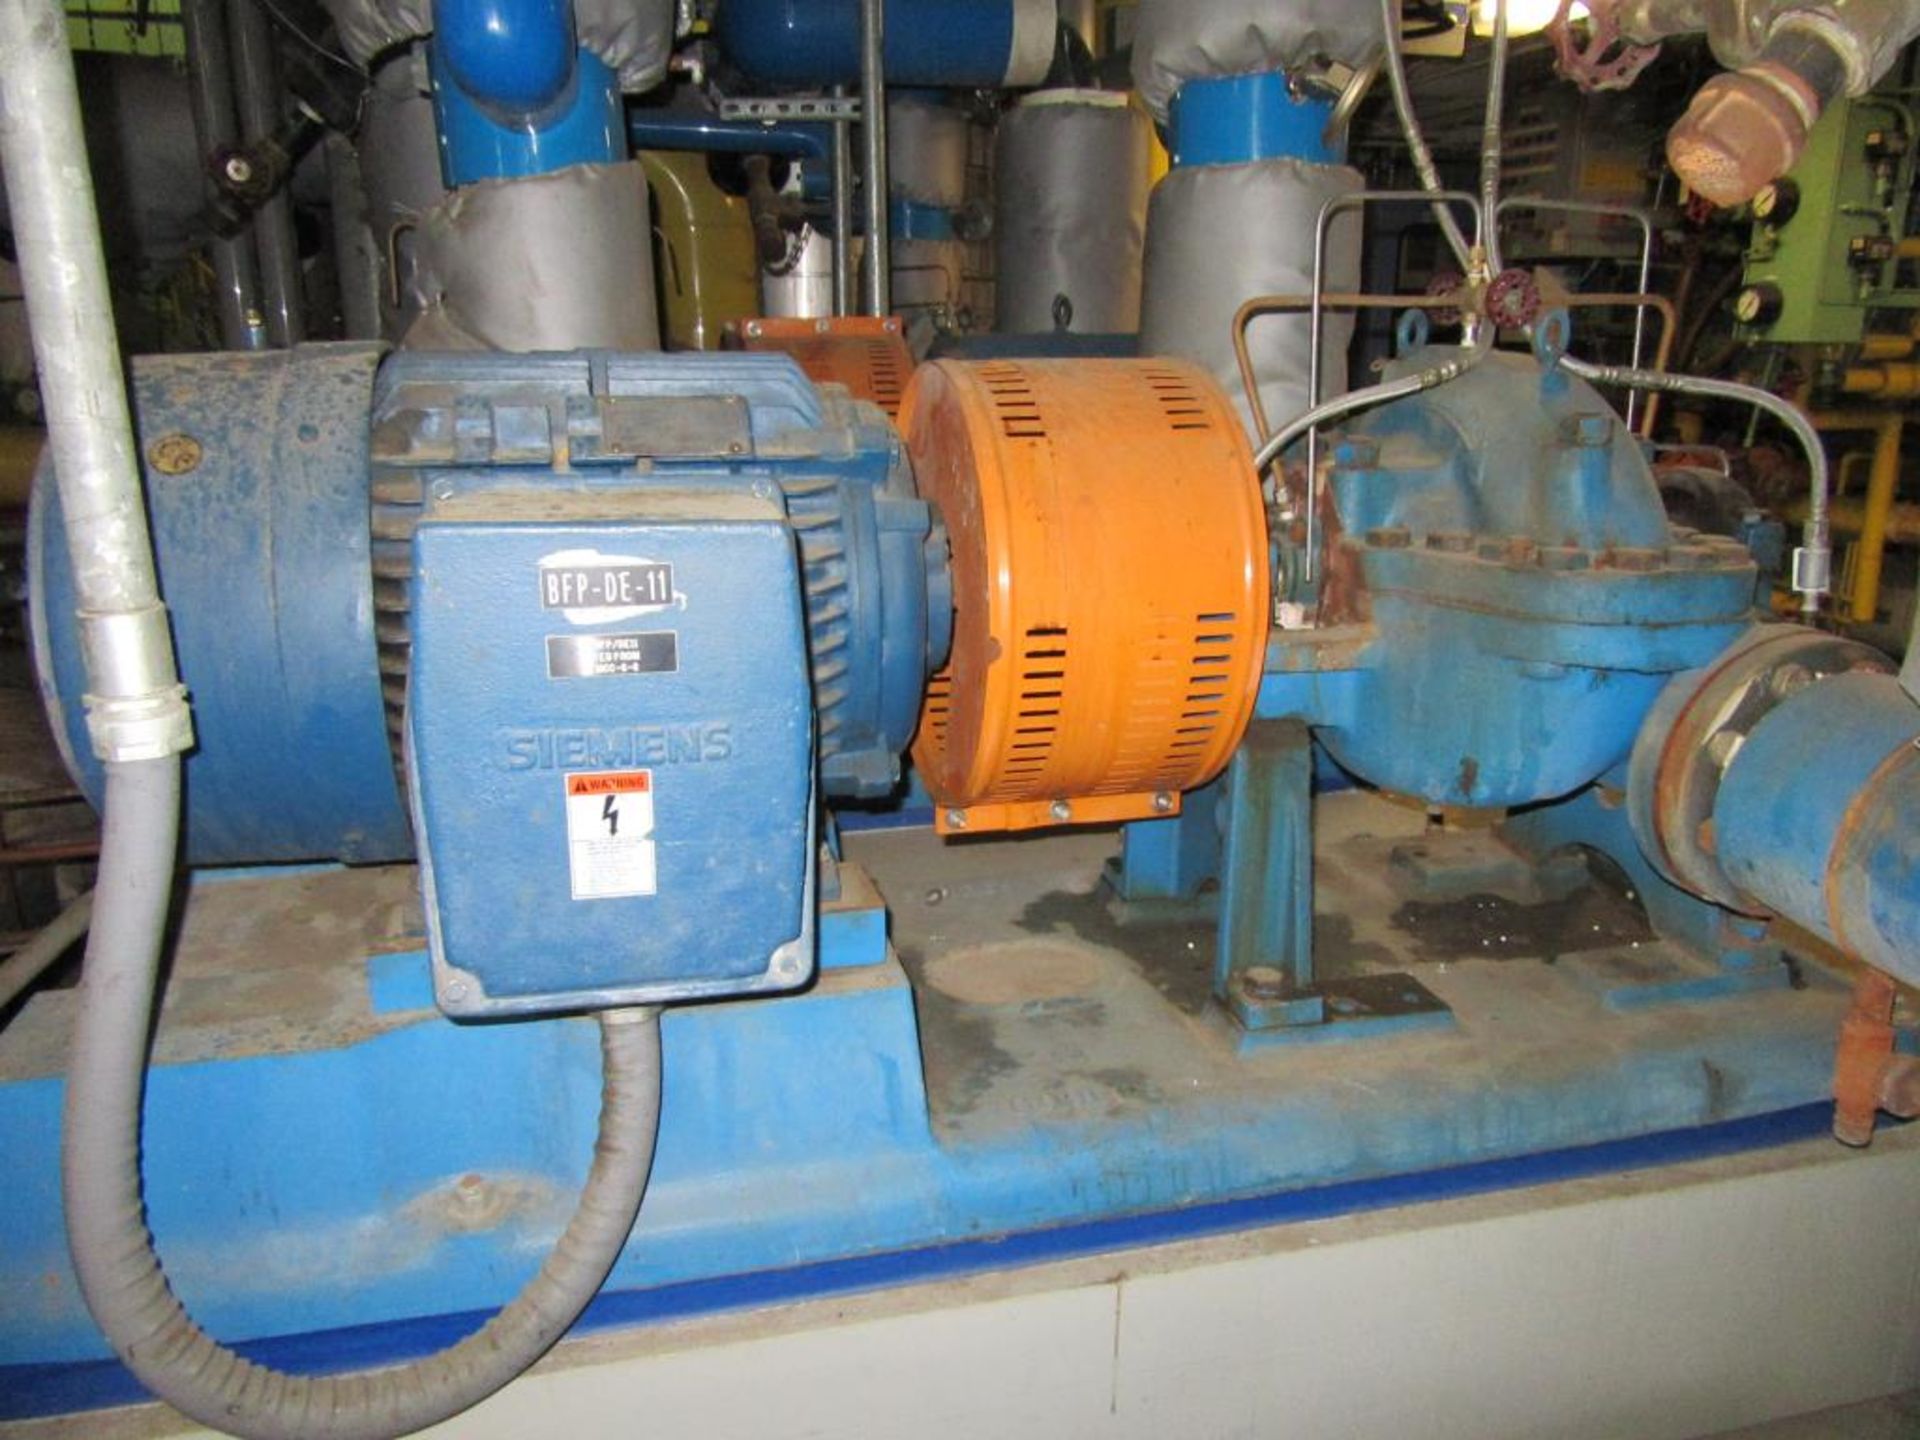 Goulds Pump 3316 Pump & Motor; 250 GPM Pump, Size 3x4-116, Imp. Dia. 9.750 with Siemens 75 HP - Image 2 of 4